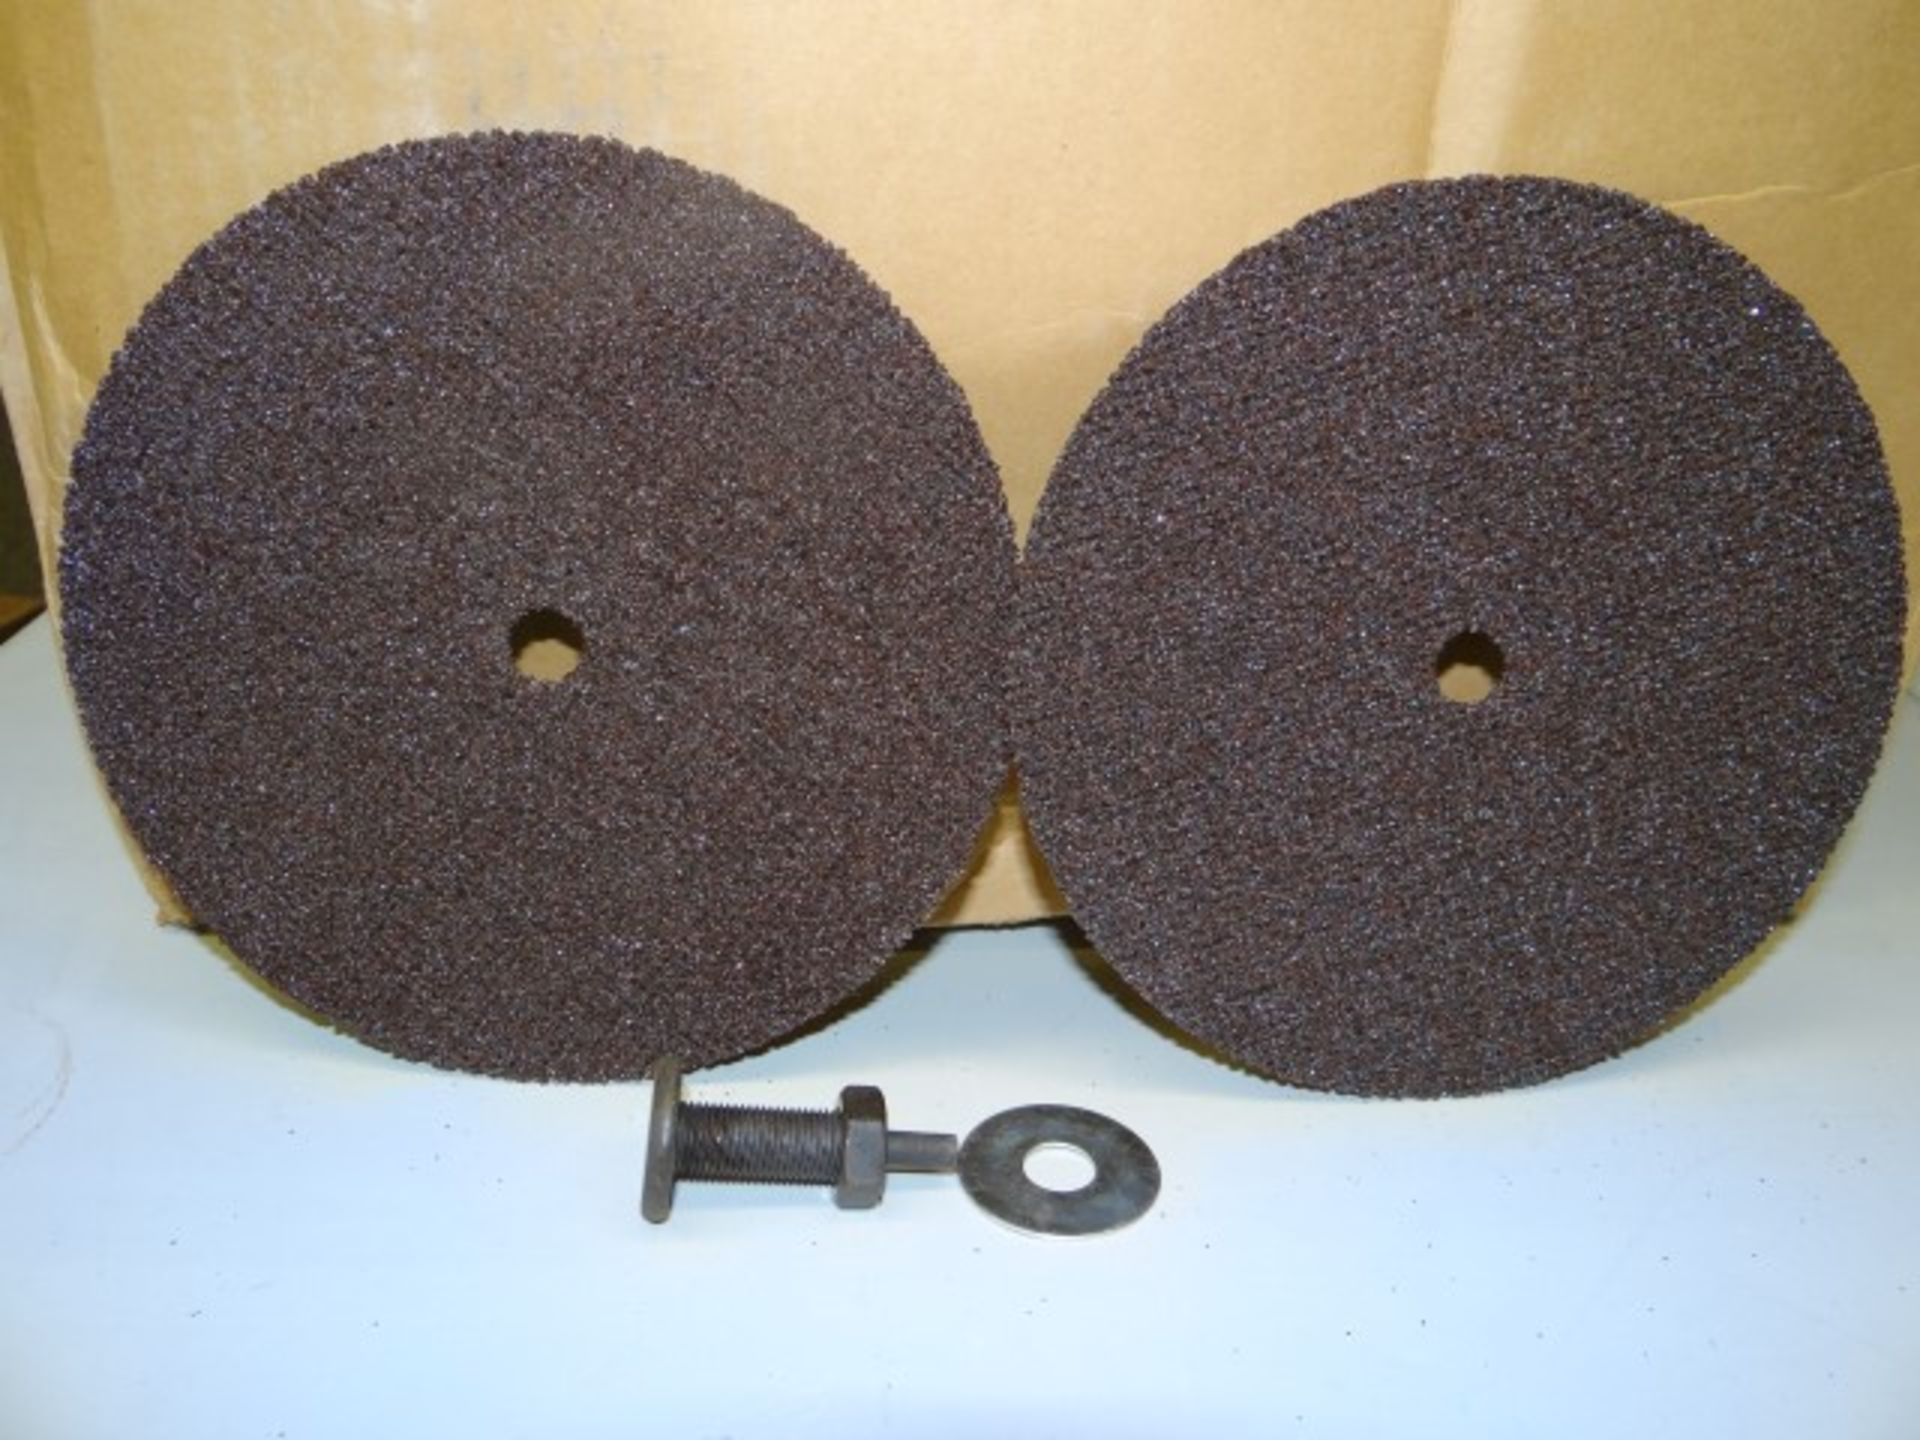 7" Aluminum Oxide Grinding and Cut Off Discs. 80Bags/Case. 2 Disks Per Pack in Sealed Bag with Arbor - Image 2 of 2